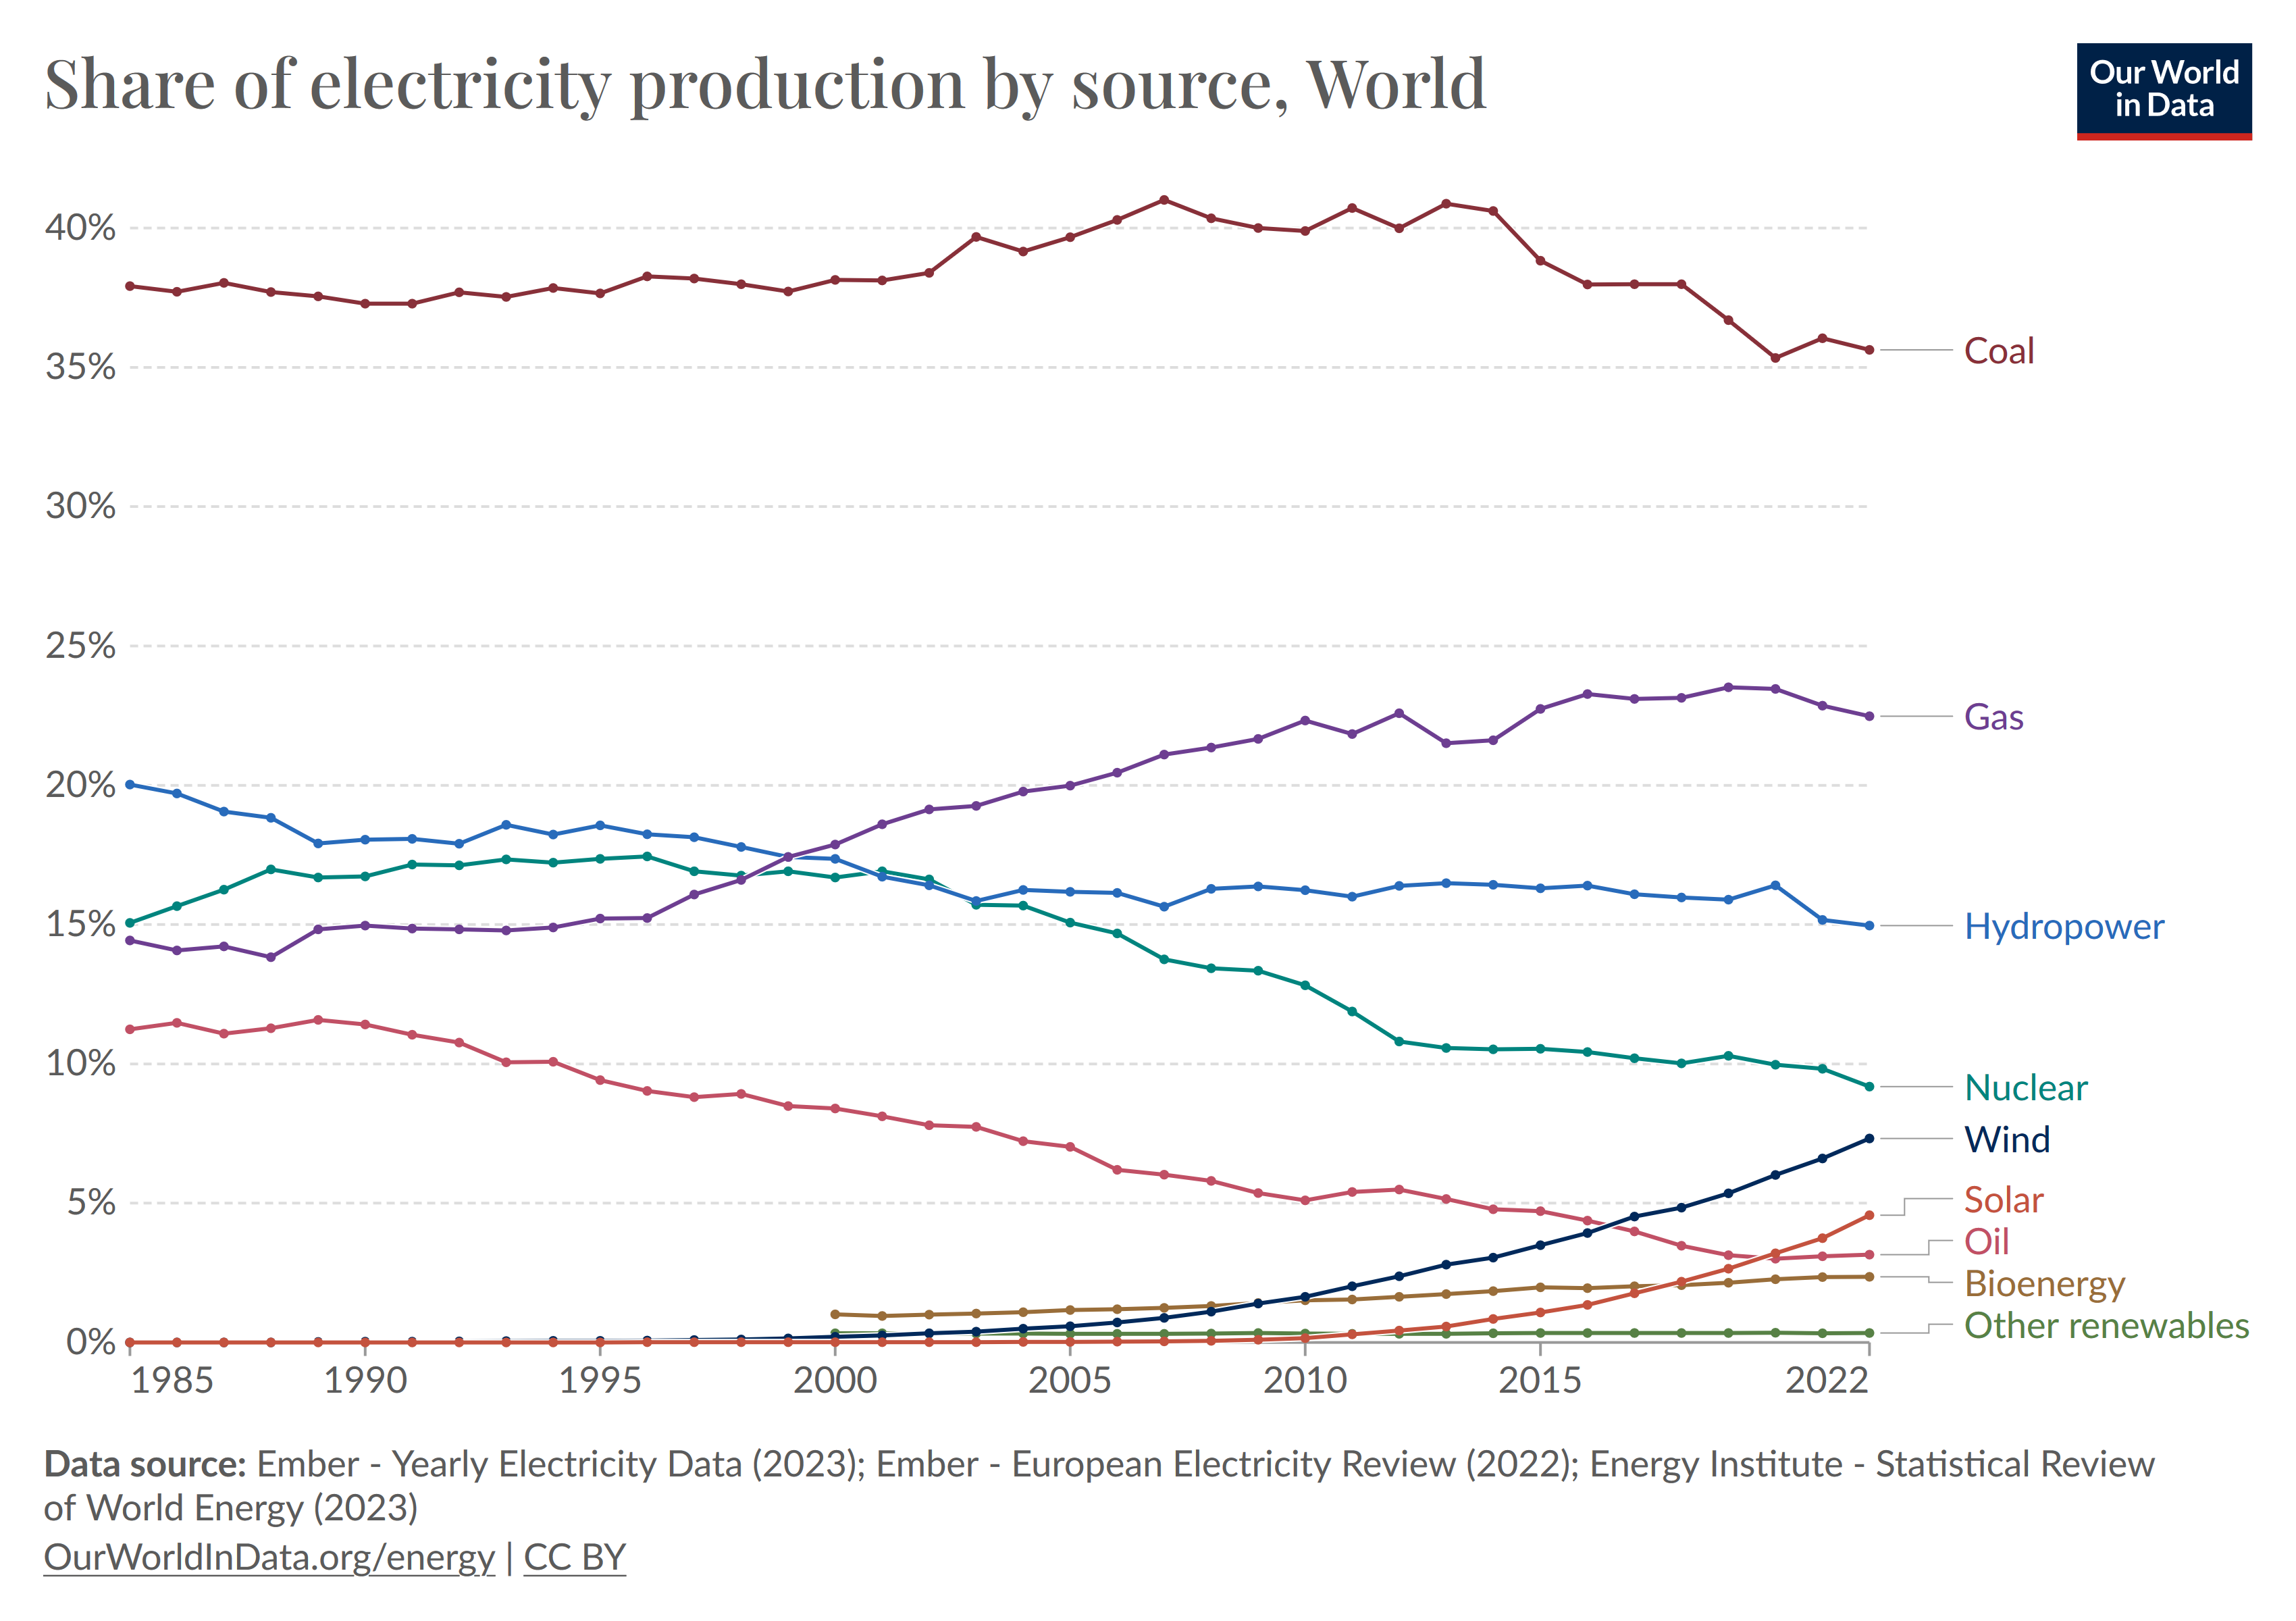 sources of electricity generation around the world. fossil fuel is dominating but renewables are gaining